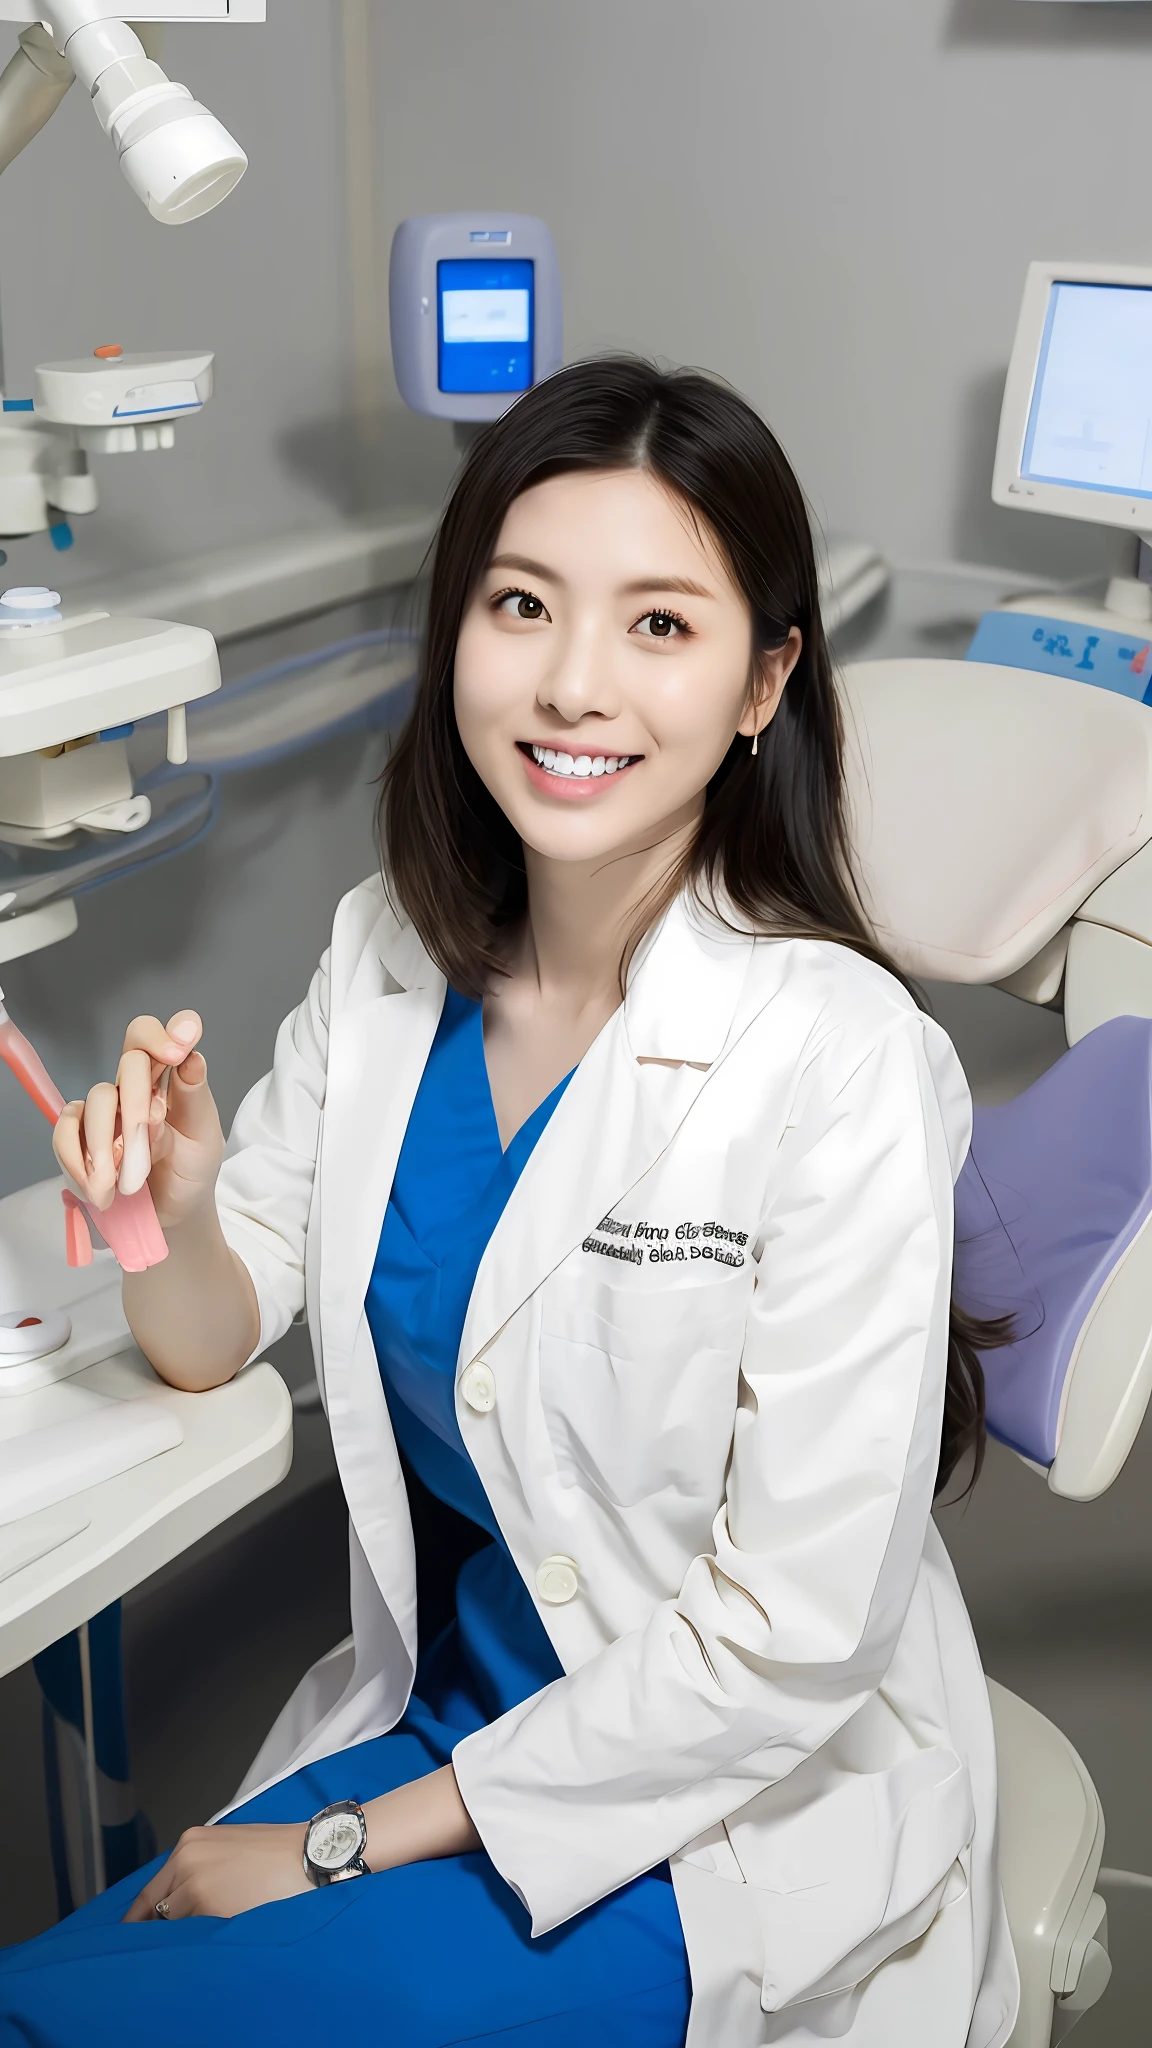 Sakuranon (single)), alone, ((dentist)), Elegant, Wear a white lab coat.., Black Hair, delicate, young woman, Short hair straps, detailed face, Hi-Res, ((earnestly)) In the hospital, Look at the camera., physician, She is a beautiful woman of success, High quality face, medicine, Hi-Res, Sharp, Sharp features, No scarf,   Unadorned,Cream skirt